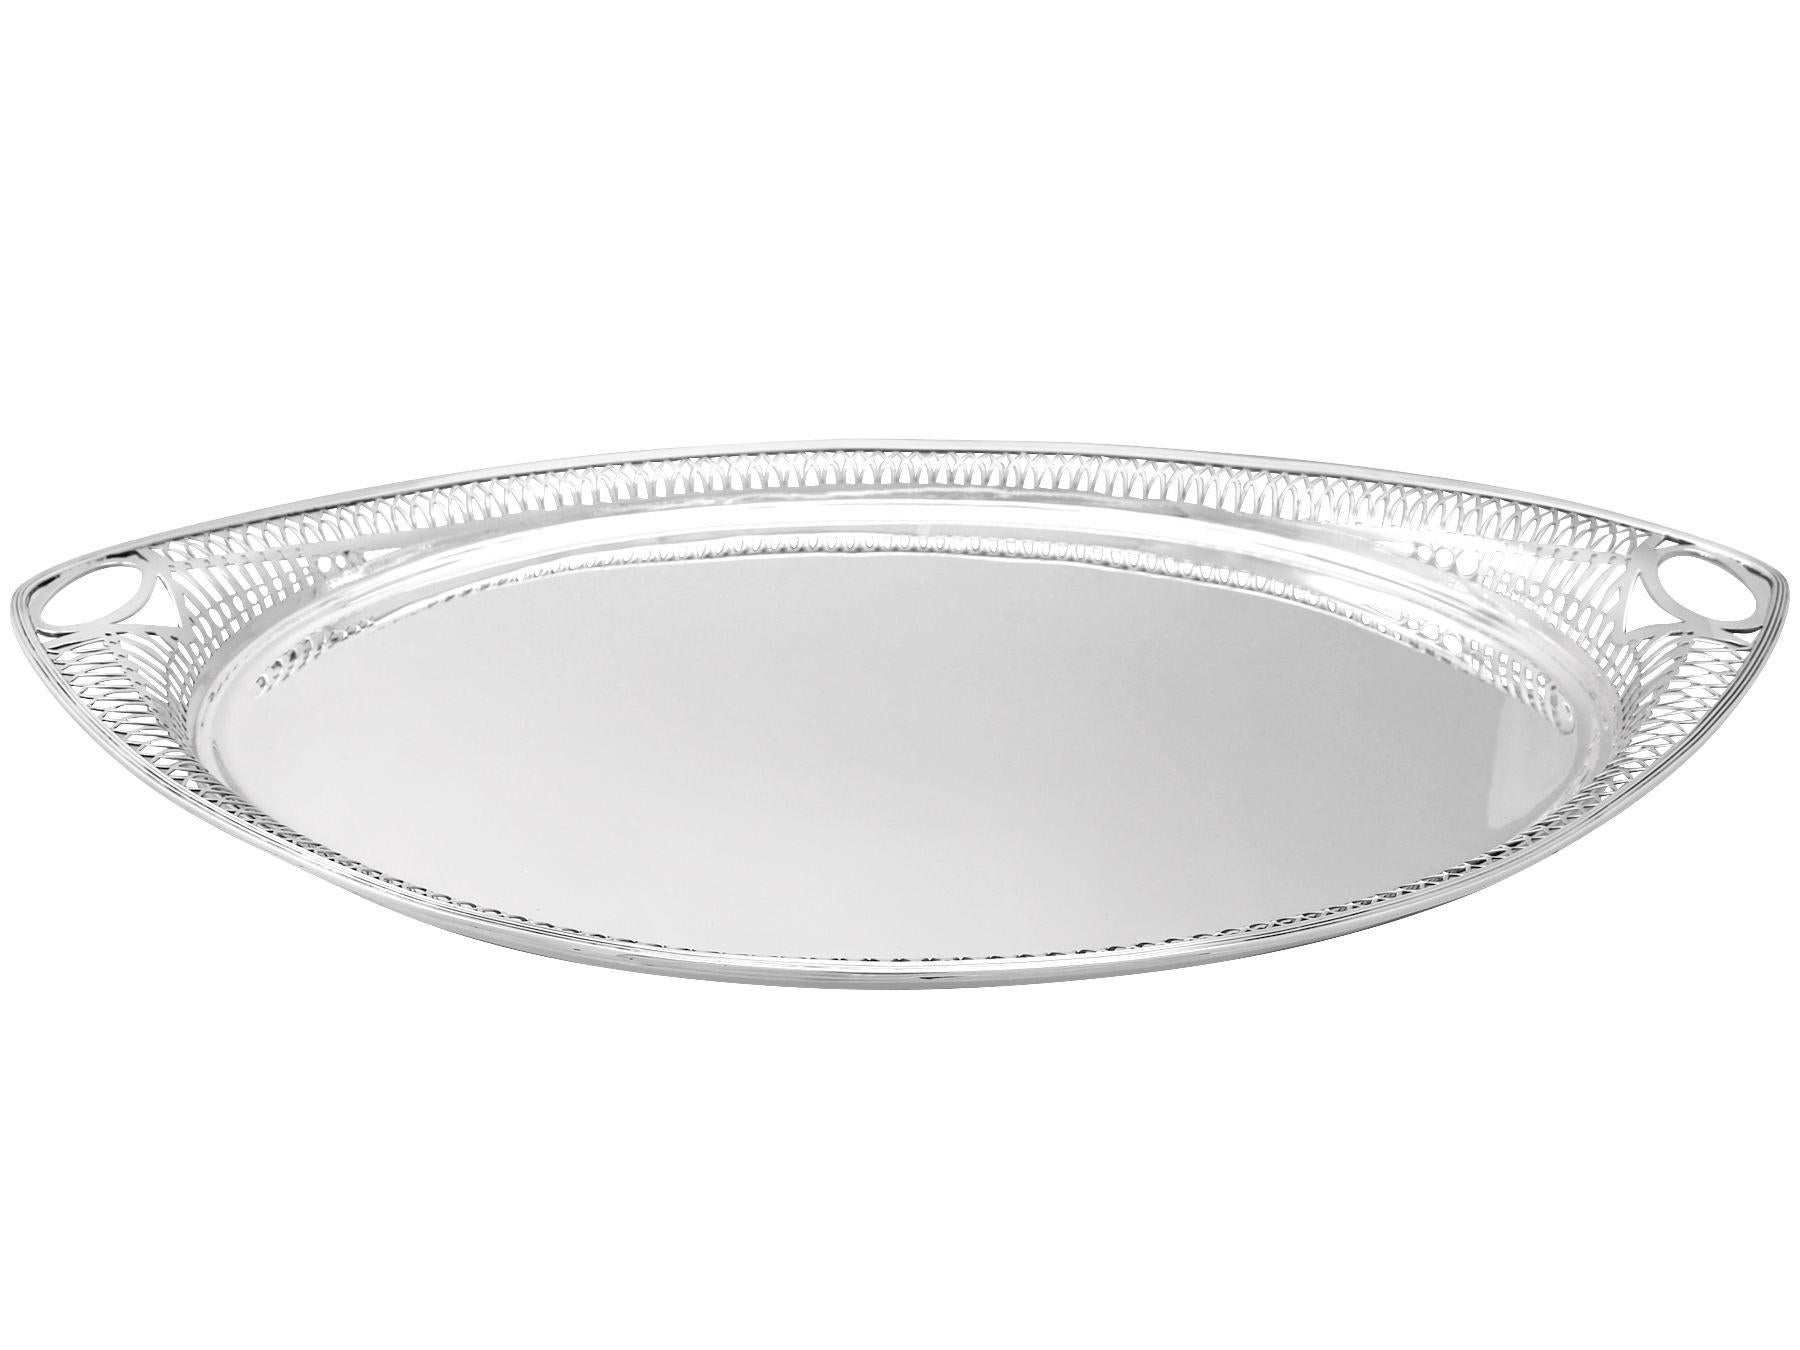 A fine and impressive antique George V English sterling silver galleried tea tray; an addition to our antique silver teaware collection.

This fine antique George V sterling silver tea tray has a rounded navette shaped form.

The surface of the